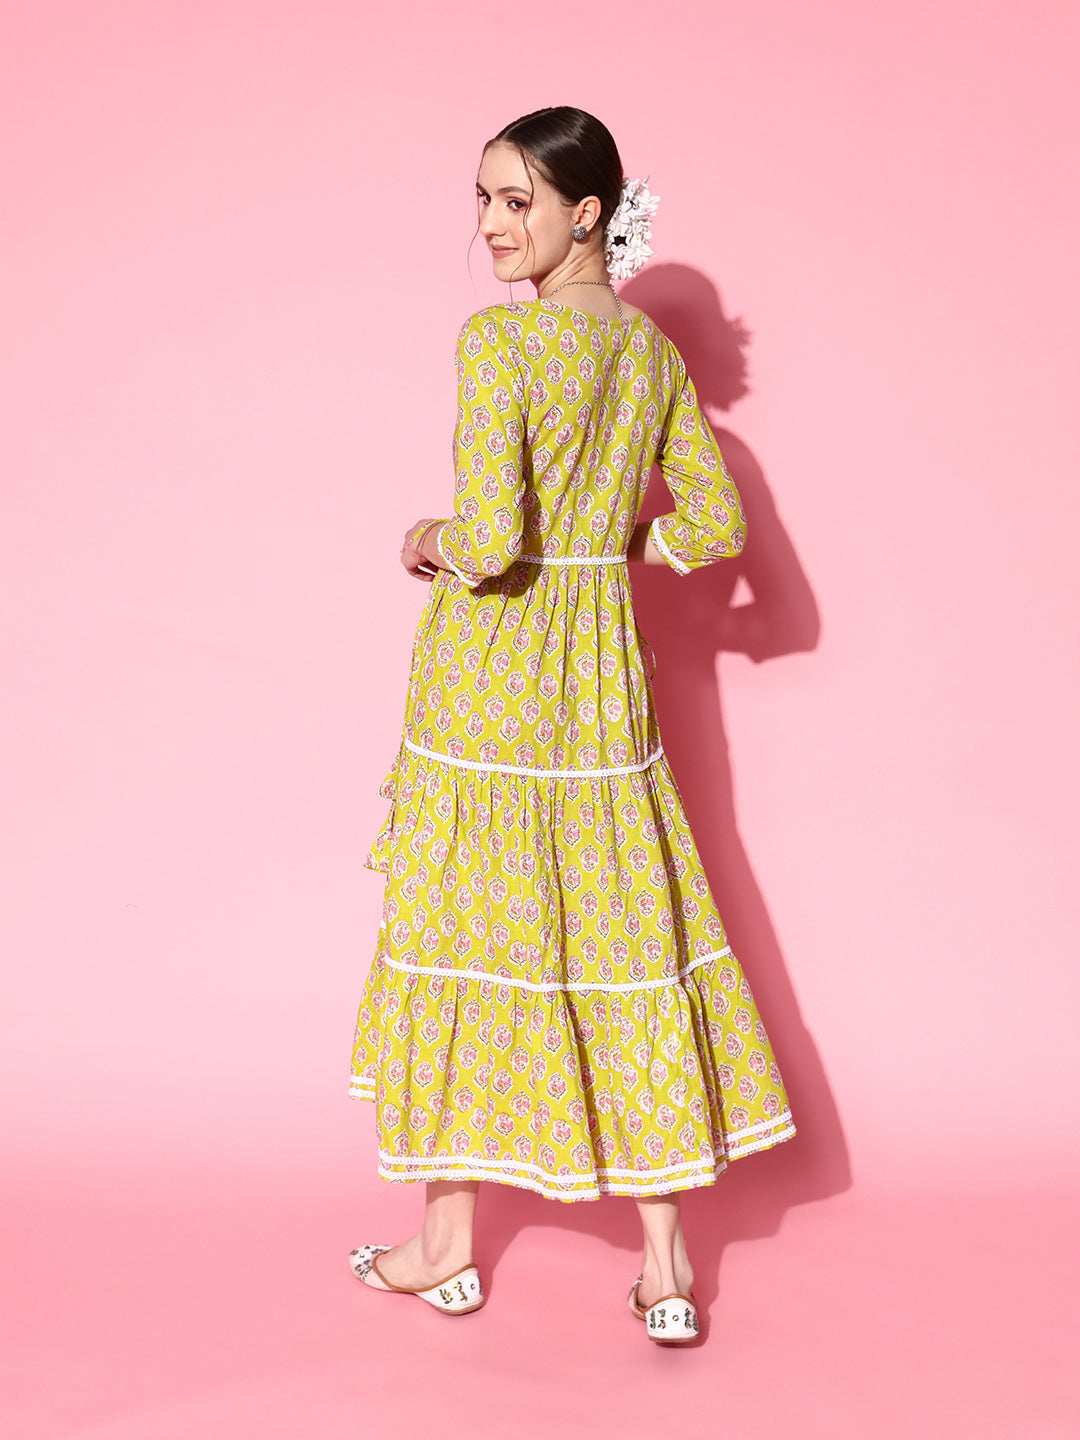 YELLOW FLORAL PRINT TIERED DRESS WITH LACE